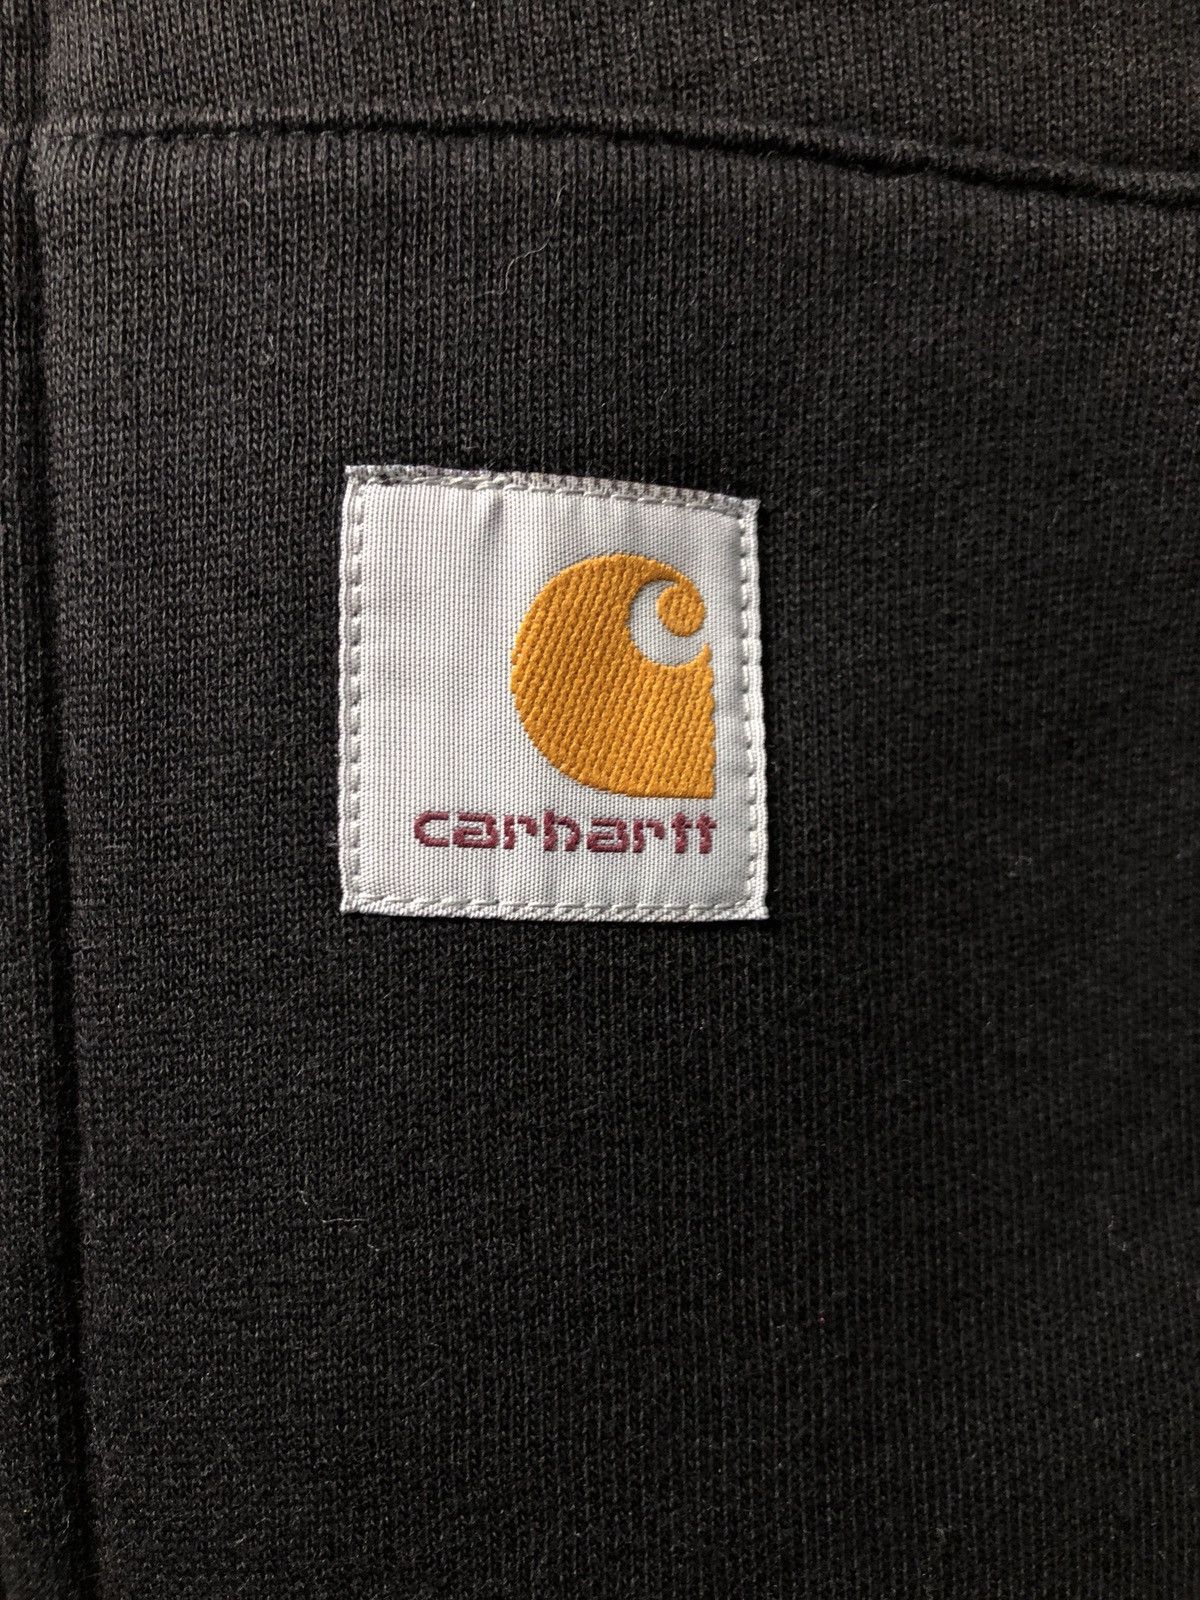 Carhartt Wip carhartt hooded square label jacket | Grailed